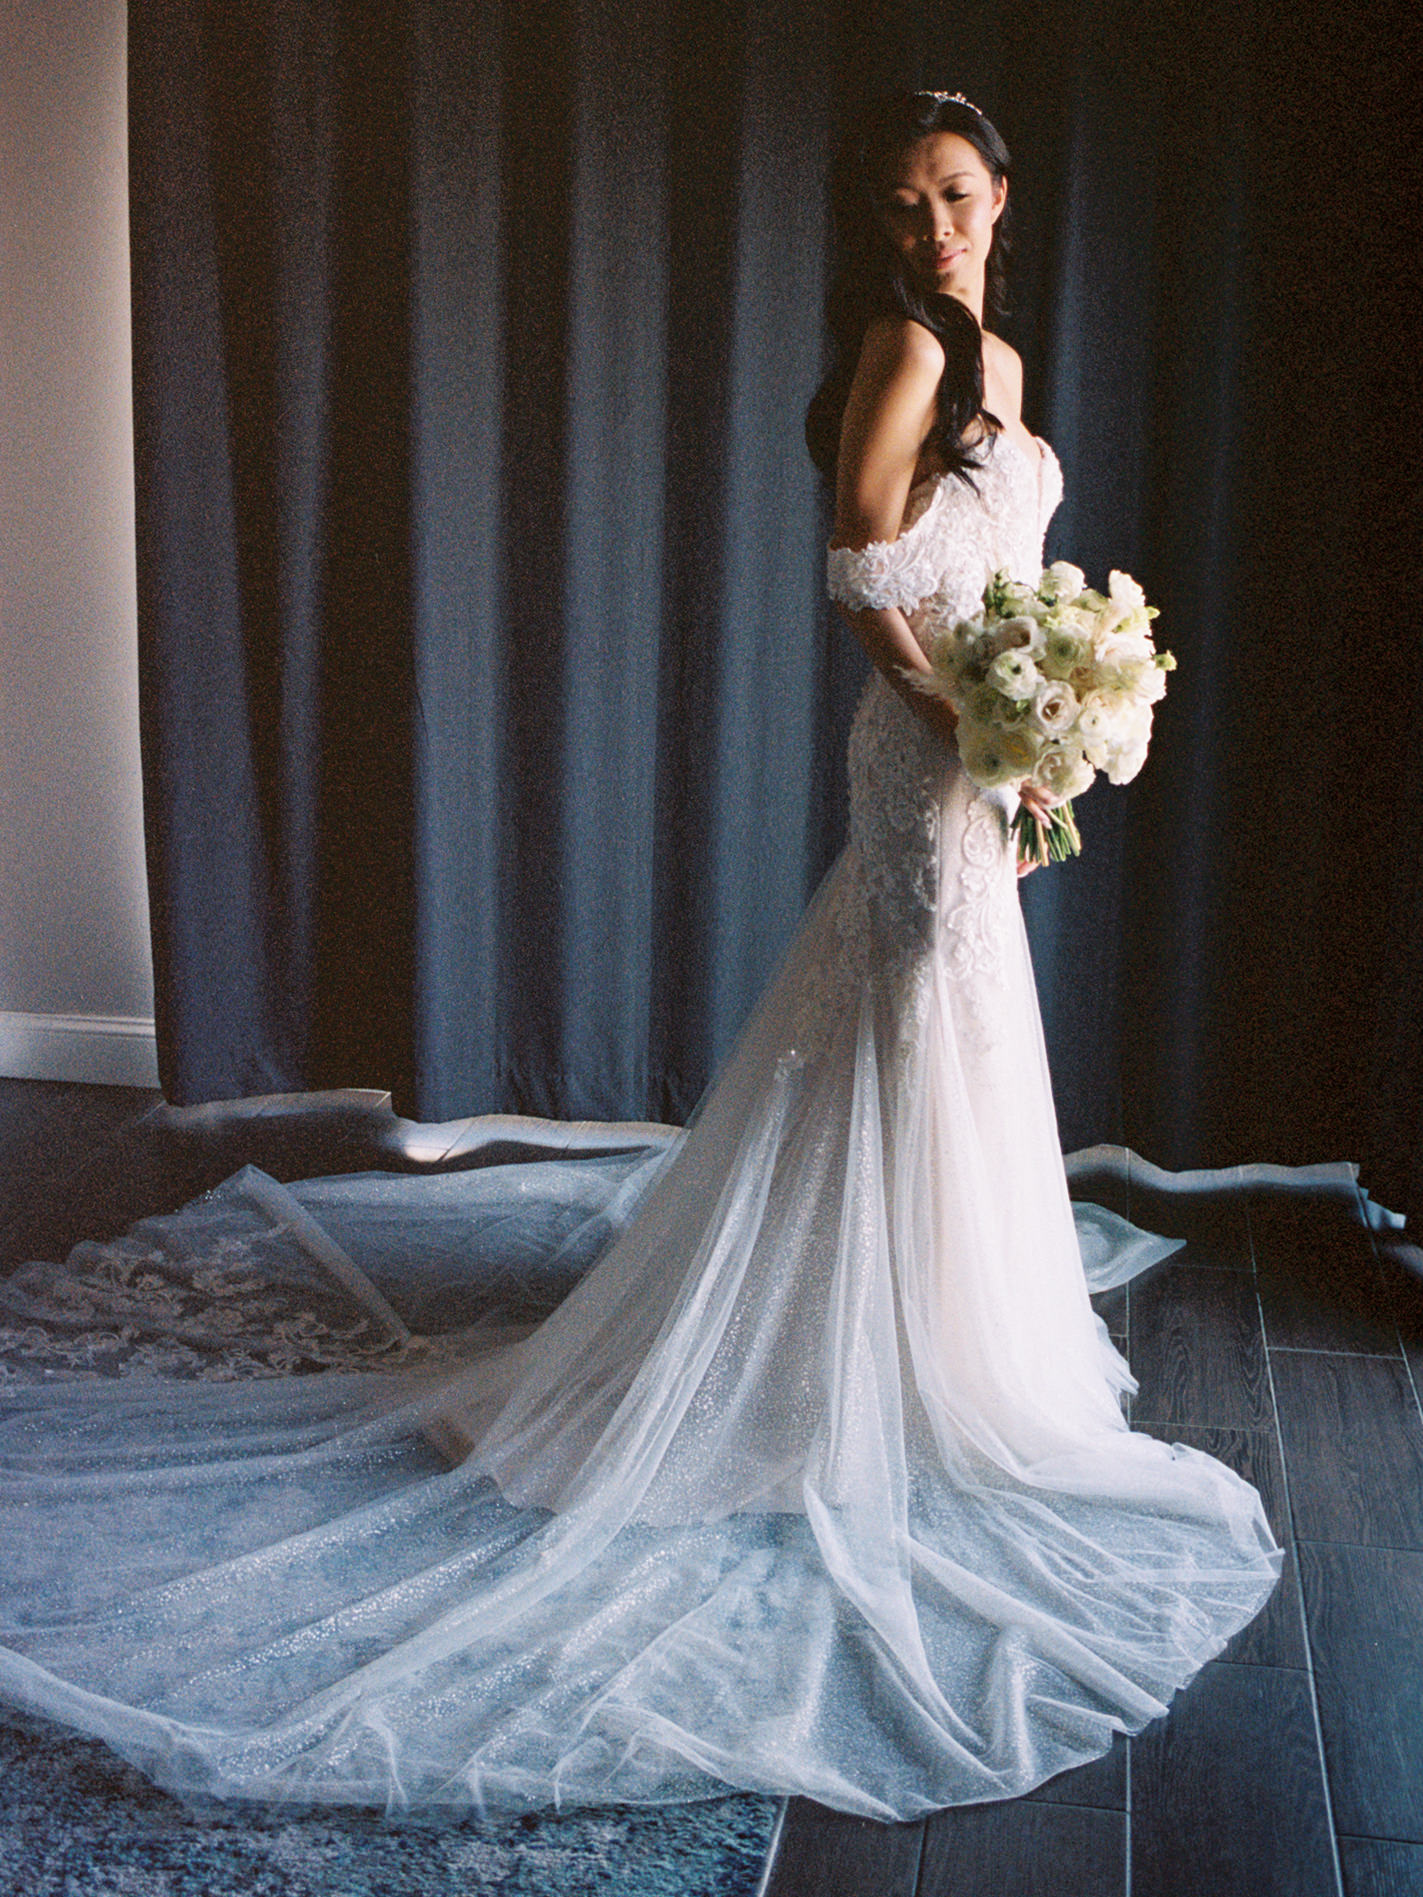 Editorial portrait photo of the bride. Film photography image by Jenny Fu Studio